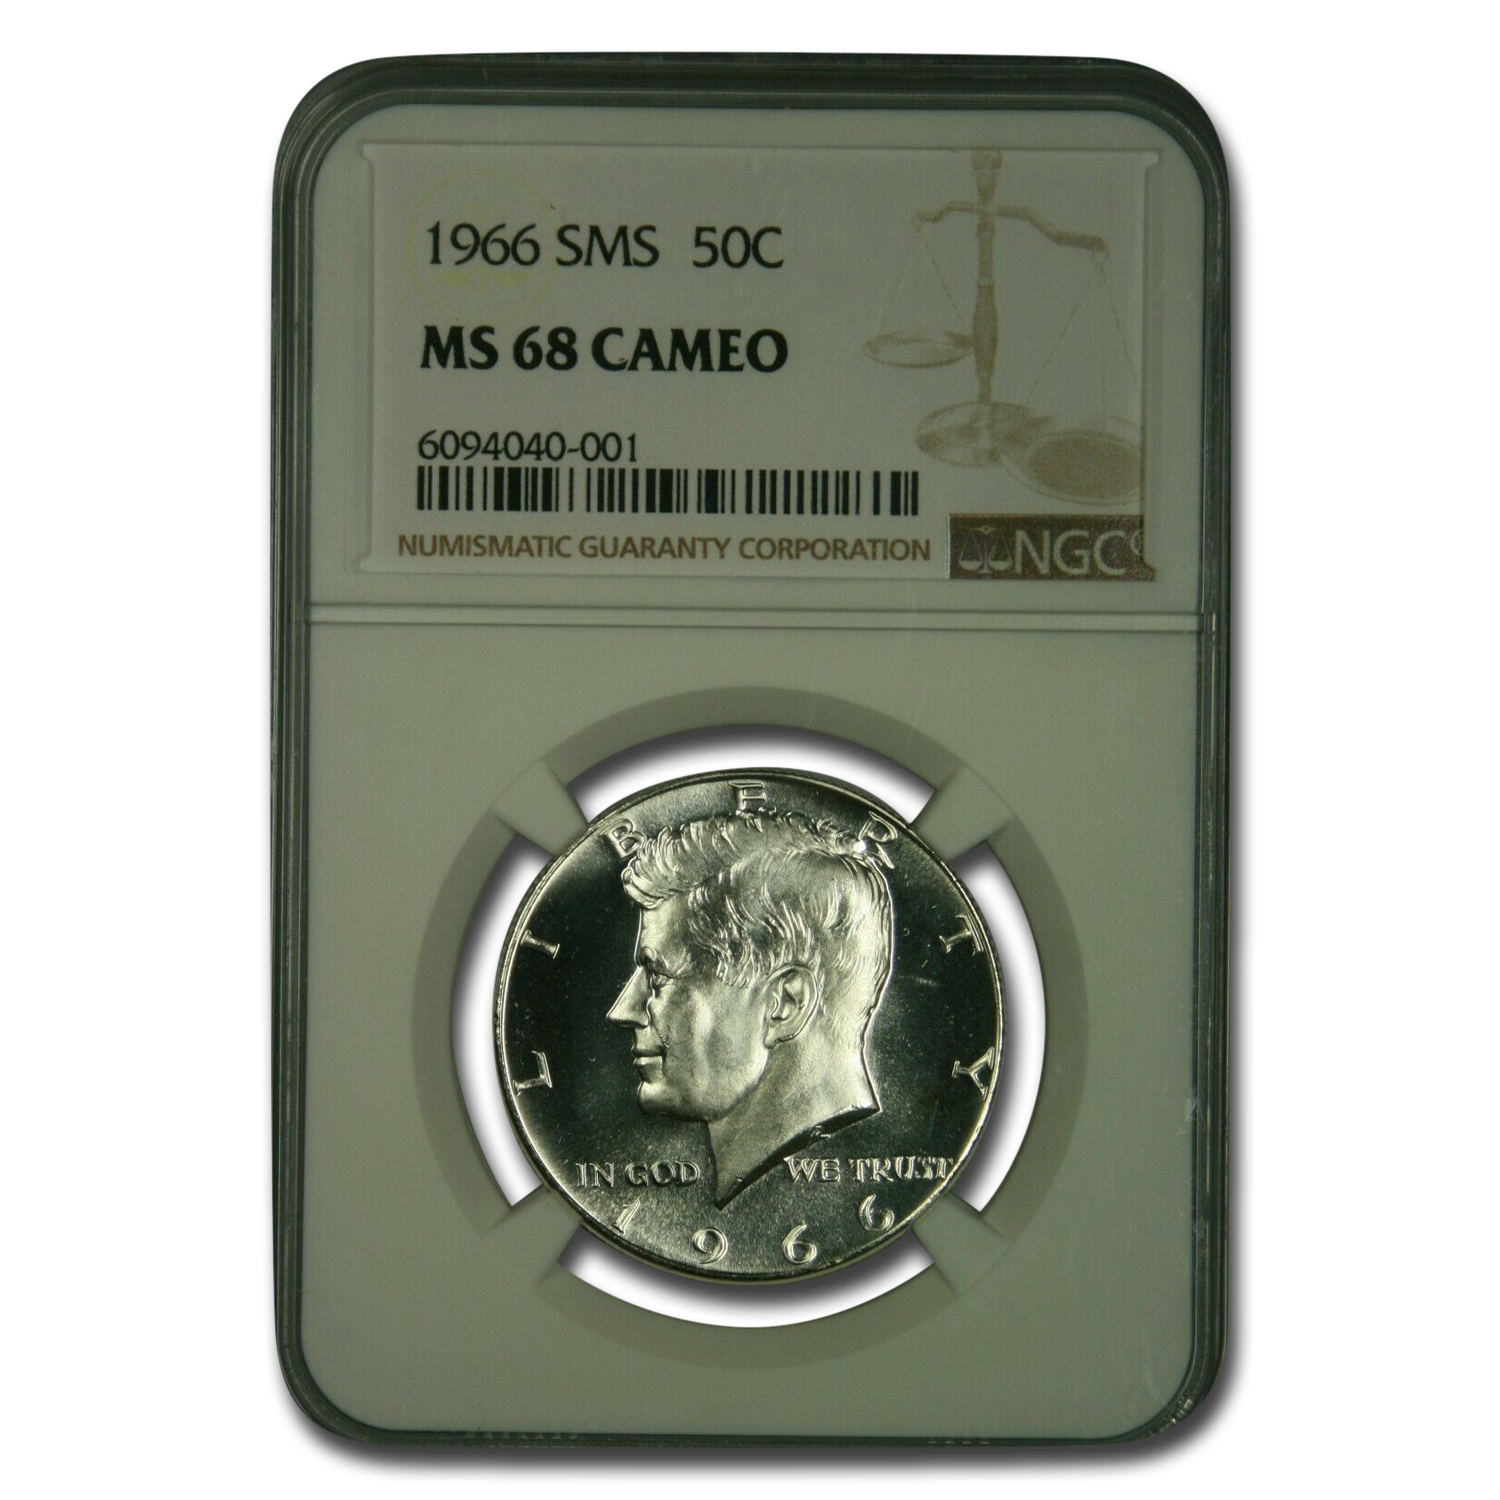 Buy 1966 SMS Kennedy Half Dollar MS-68 NGC Cameo - Click Image to Close